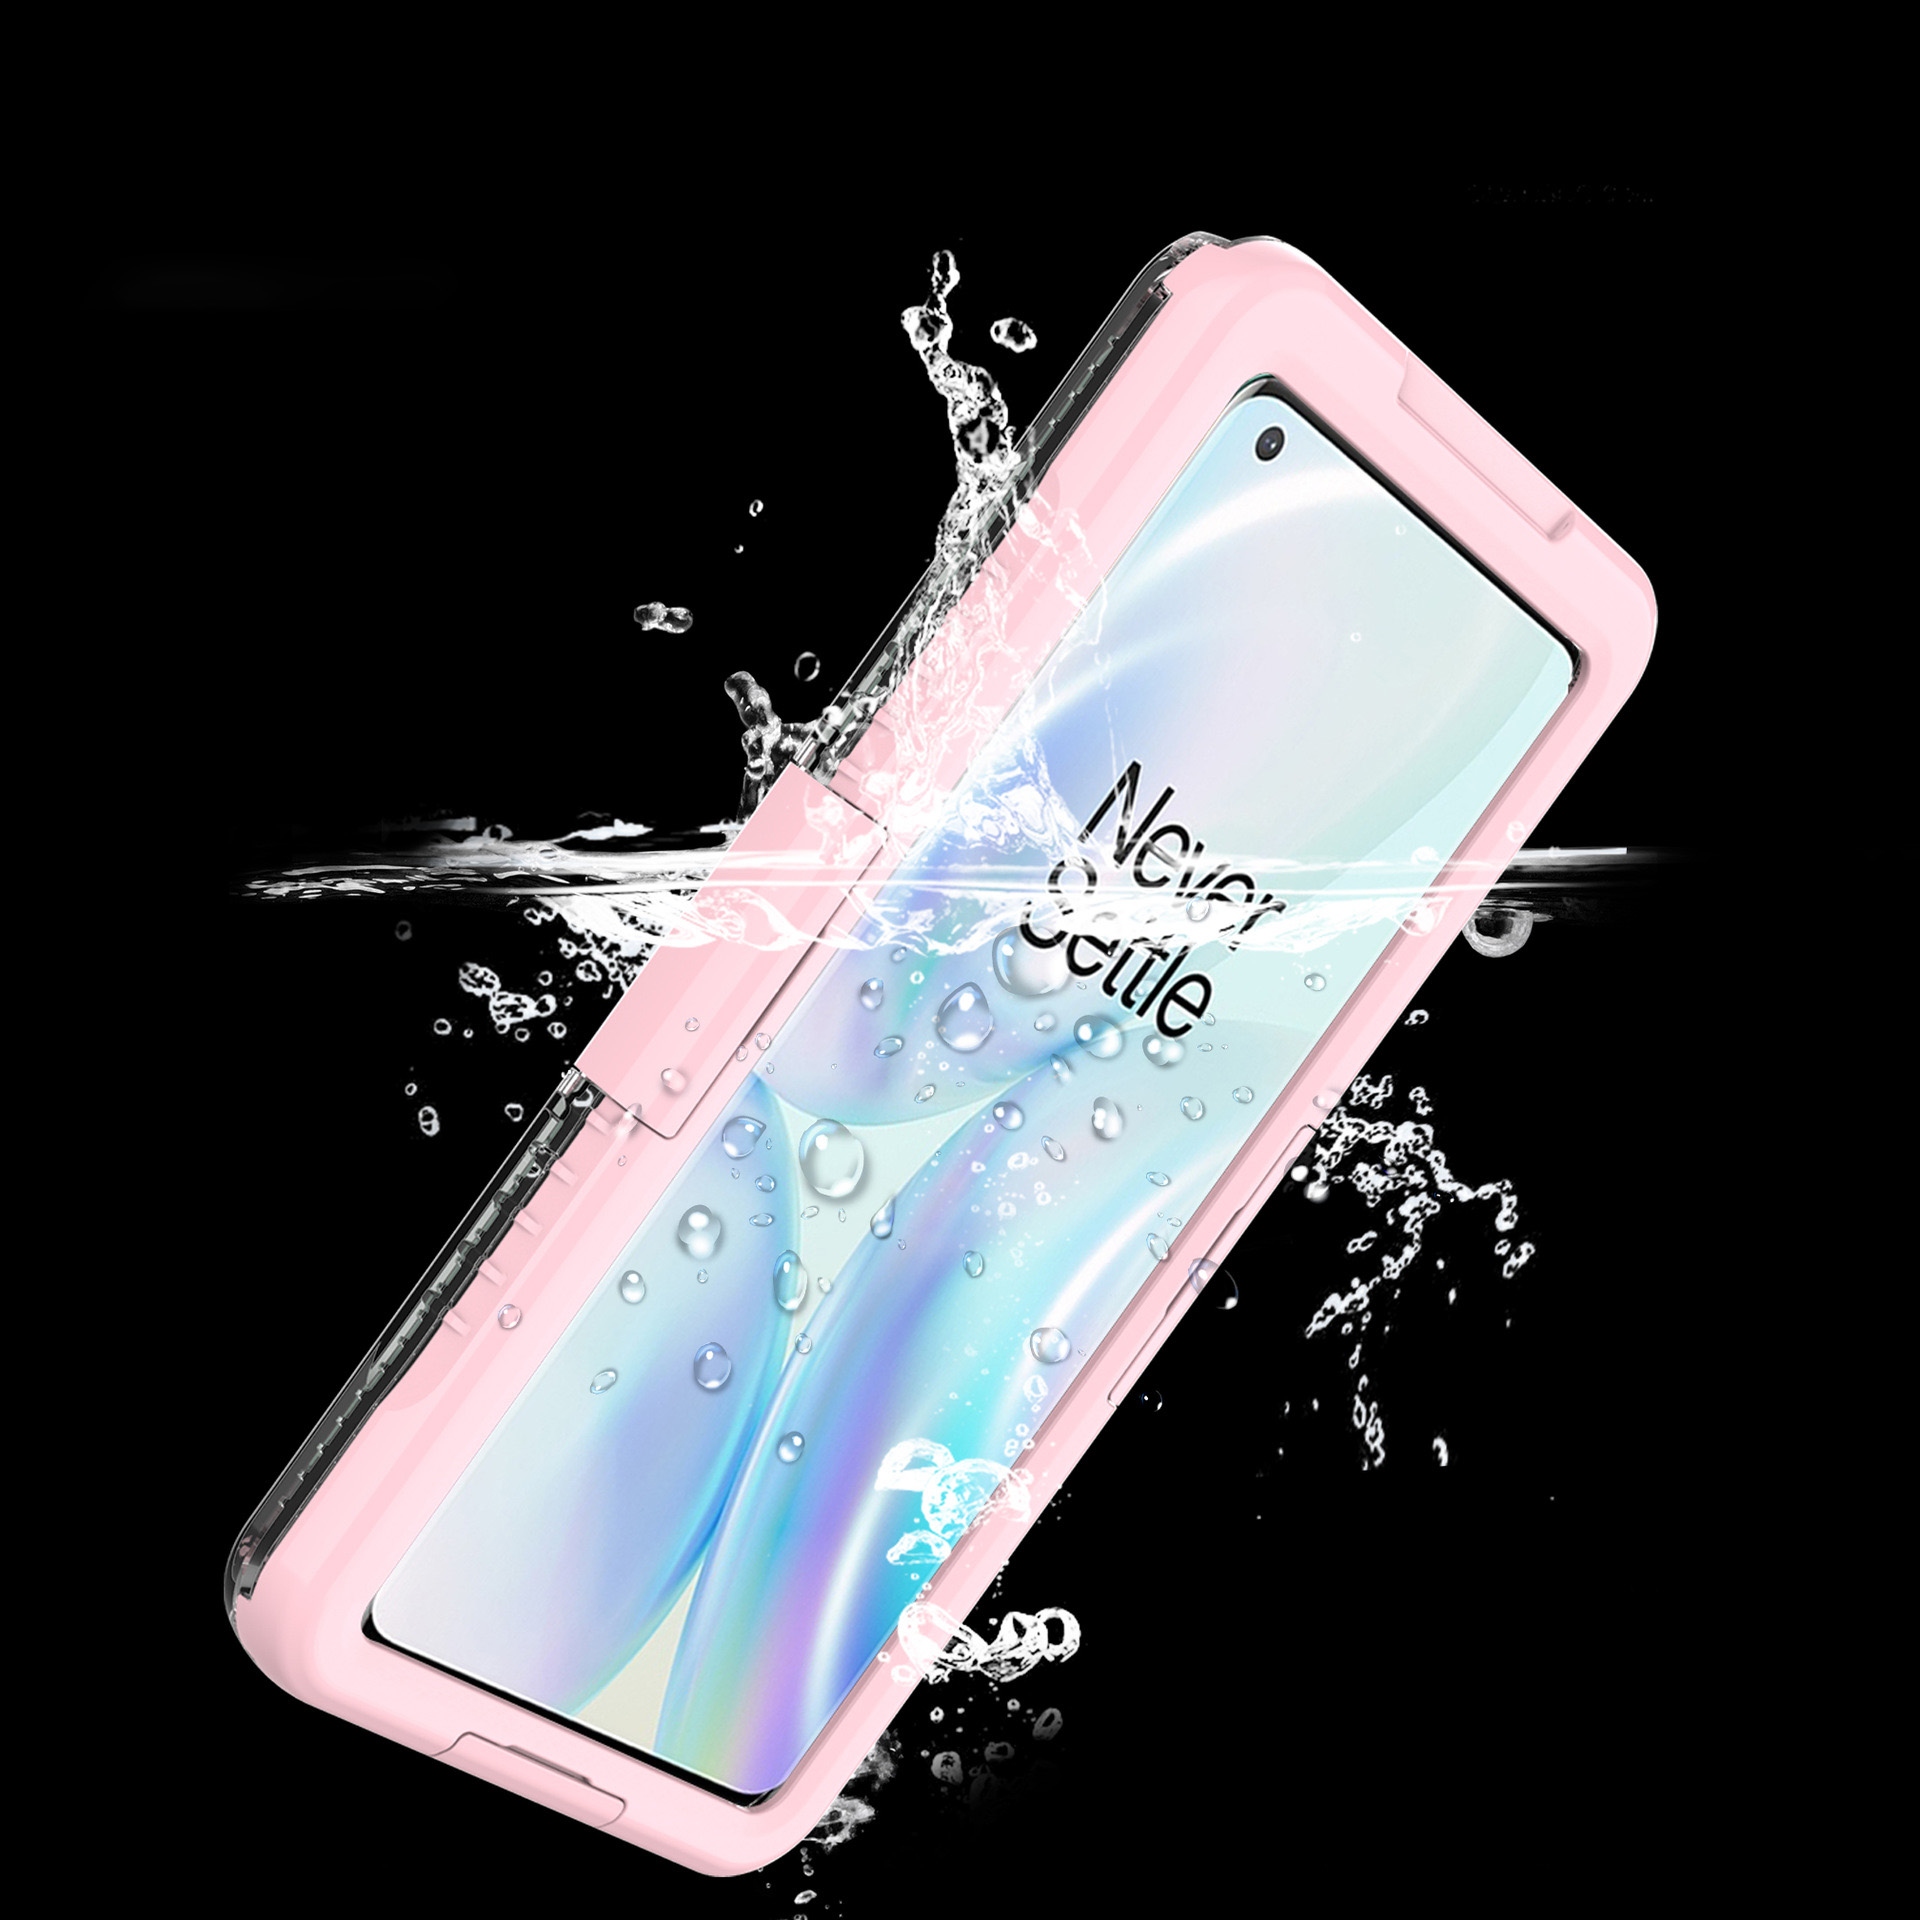 Bakeey-for-OnePlus-9-Pro-8T--8-7-8-Pro-7T-7-Pro-IP68-Waterproof-Case-Transparent-Touch-Screen-PC--TP-1838918-6